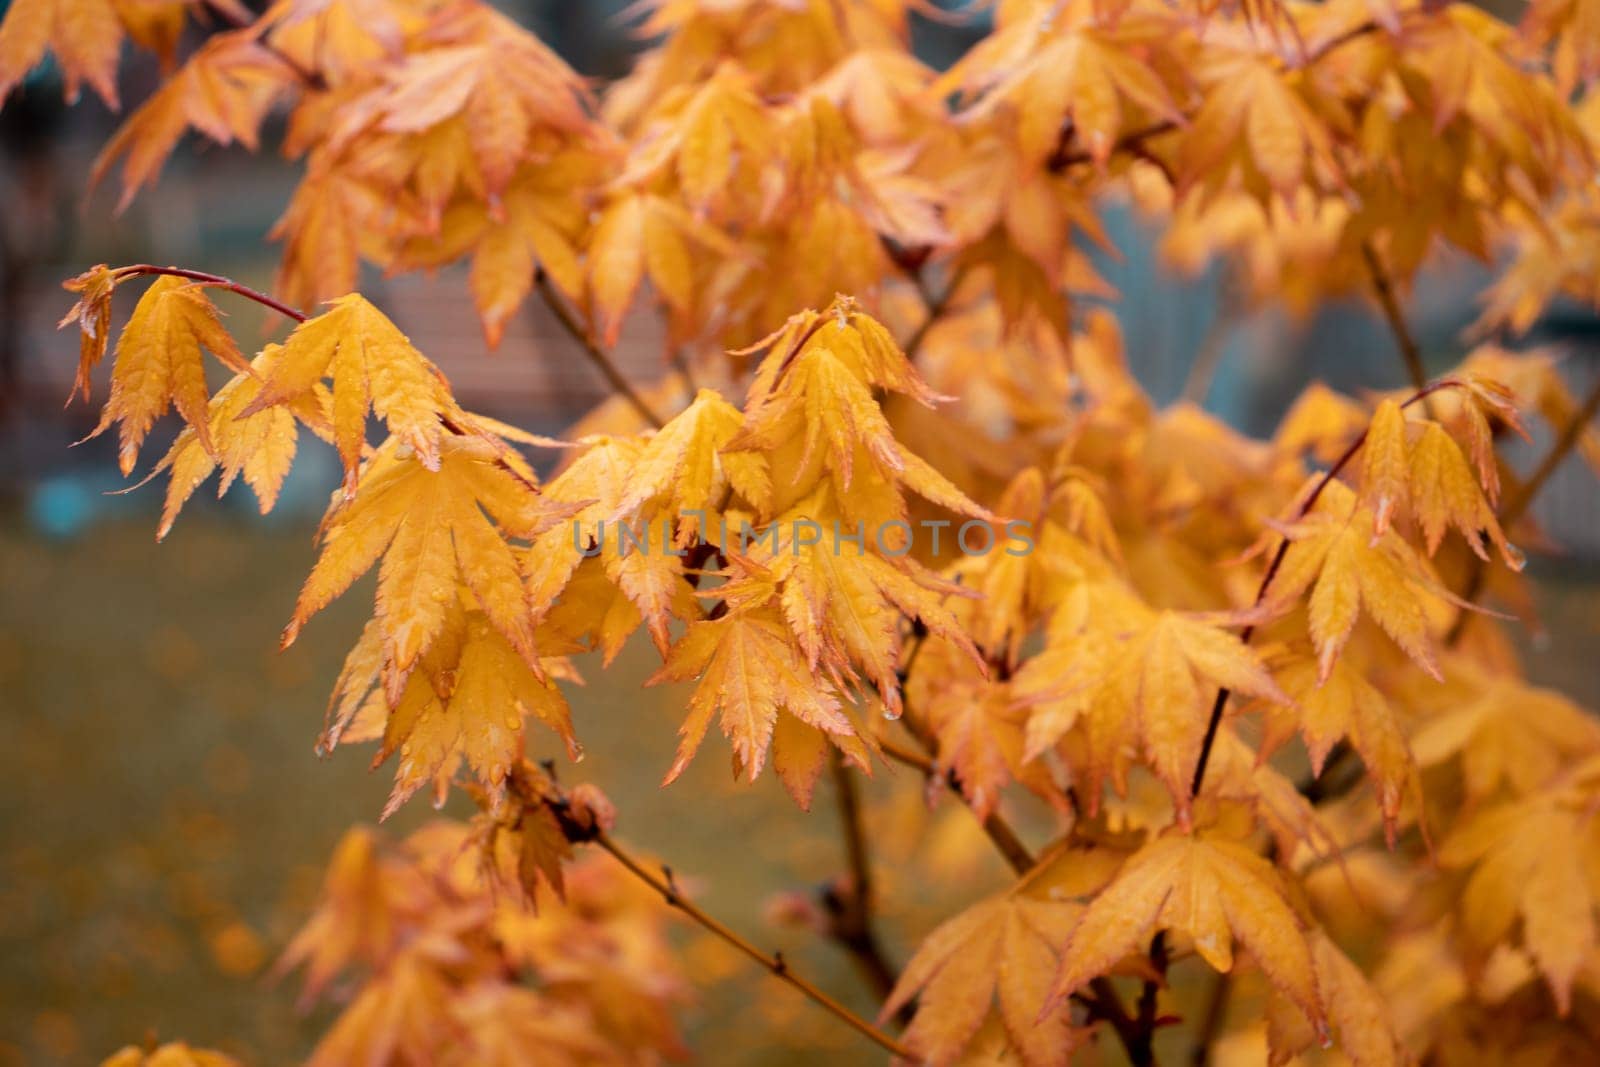 Maple branch with rain drops, autumn concept photo. Front view photography with blurred background. High quality picture for wallpaper